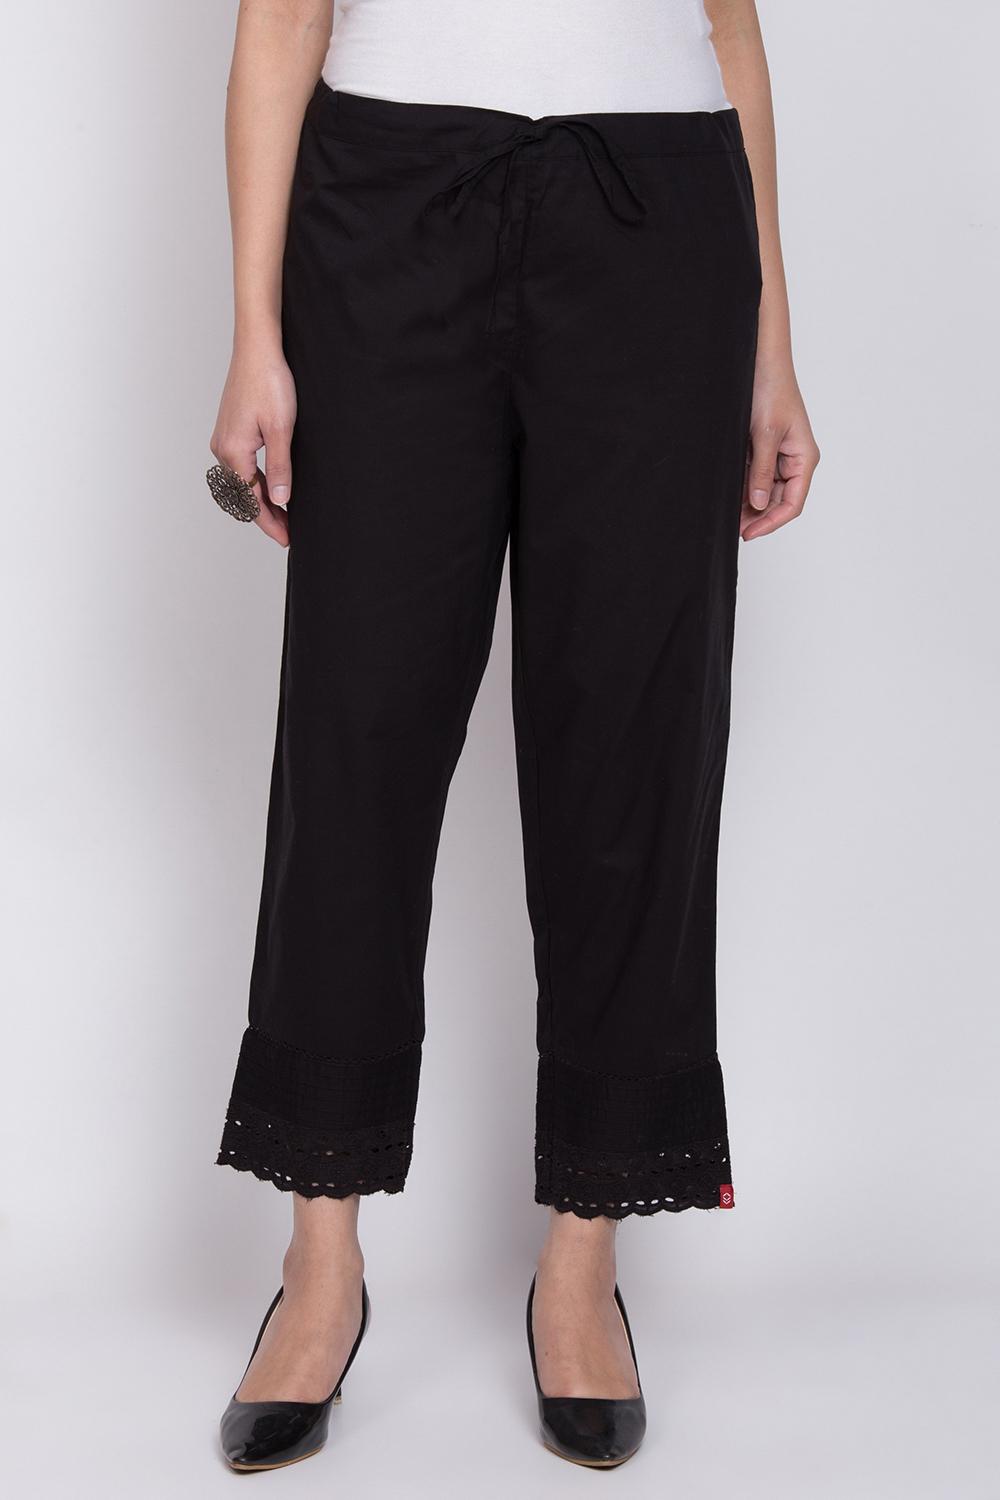 Buy Online Black Cotton Pants for Women & Girls at Best Prices in ...